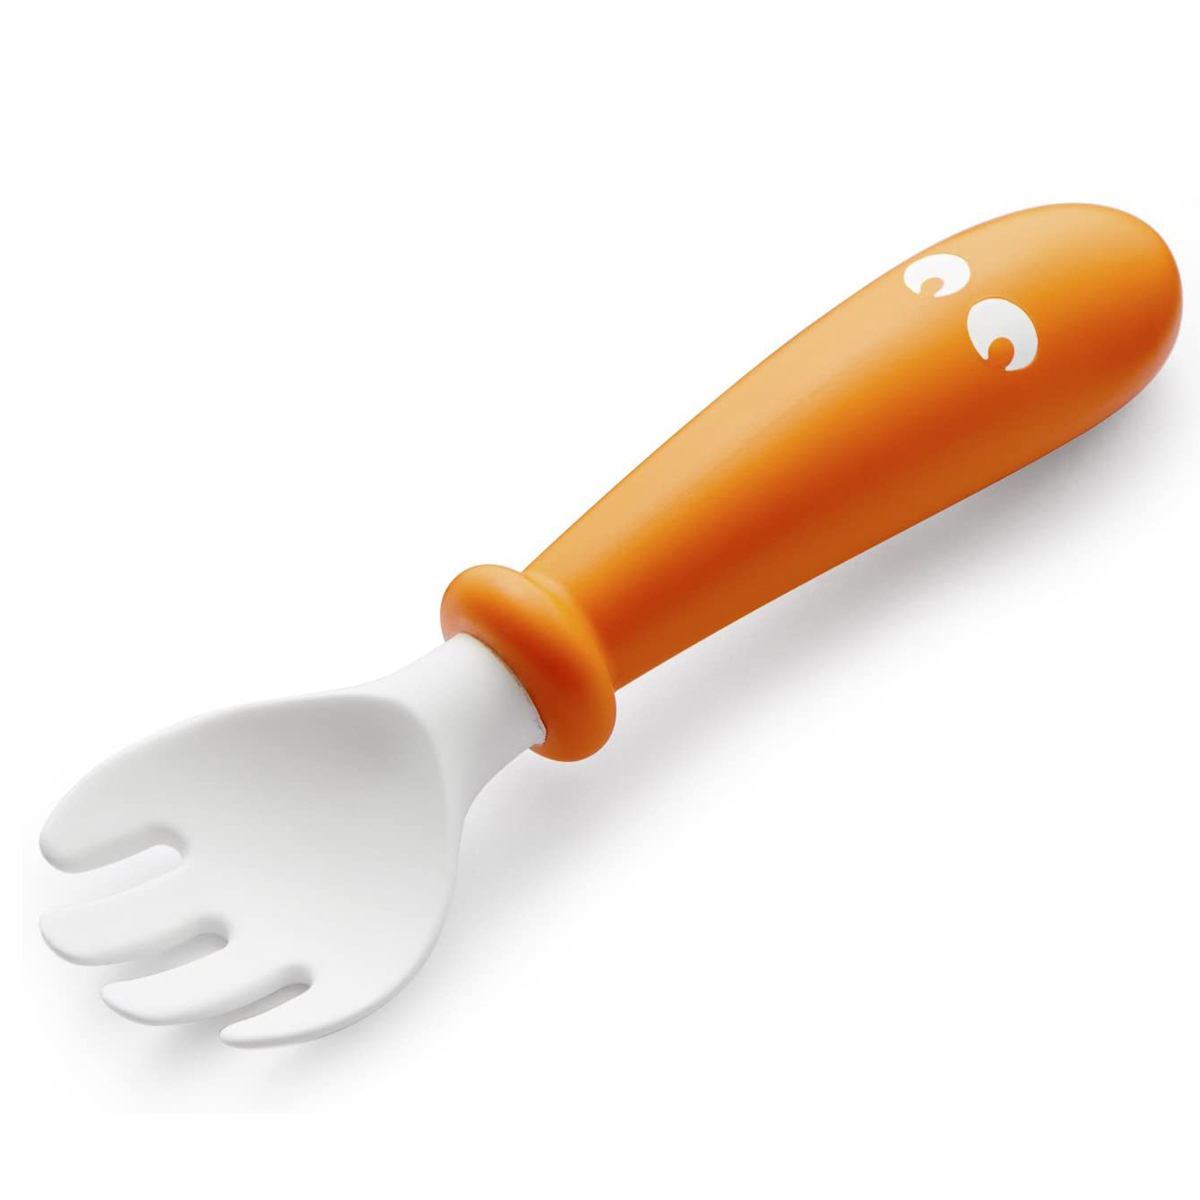 Baby Plates Spoons And Forks – Orange / Turquoise, 2 Pack